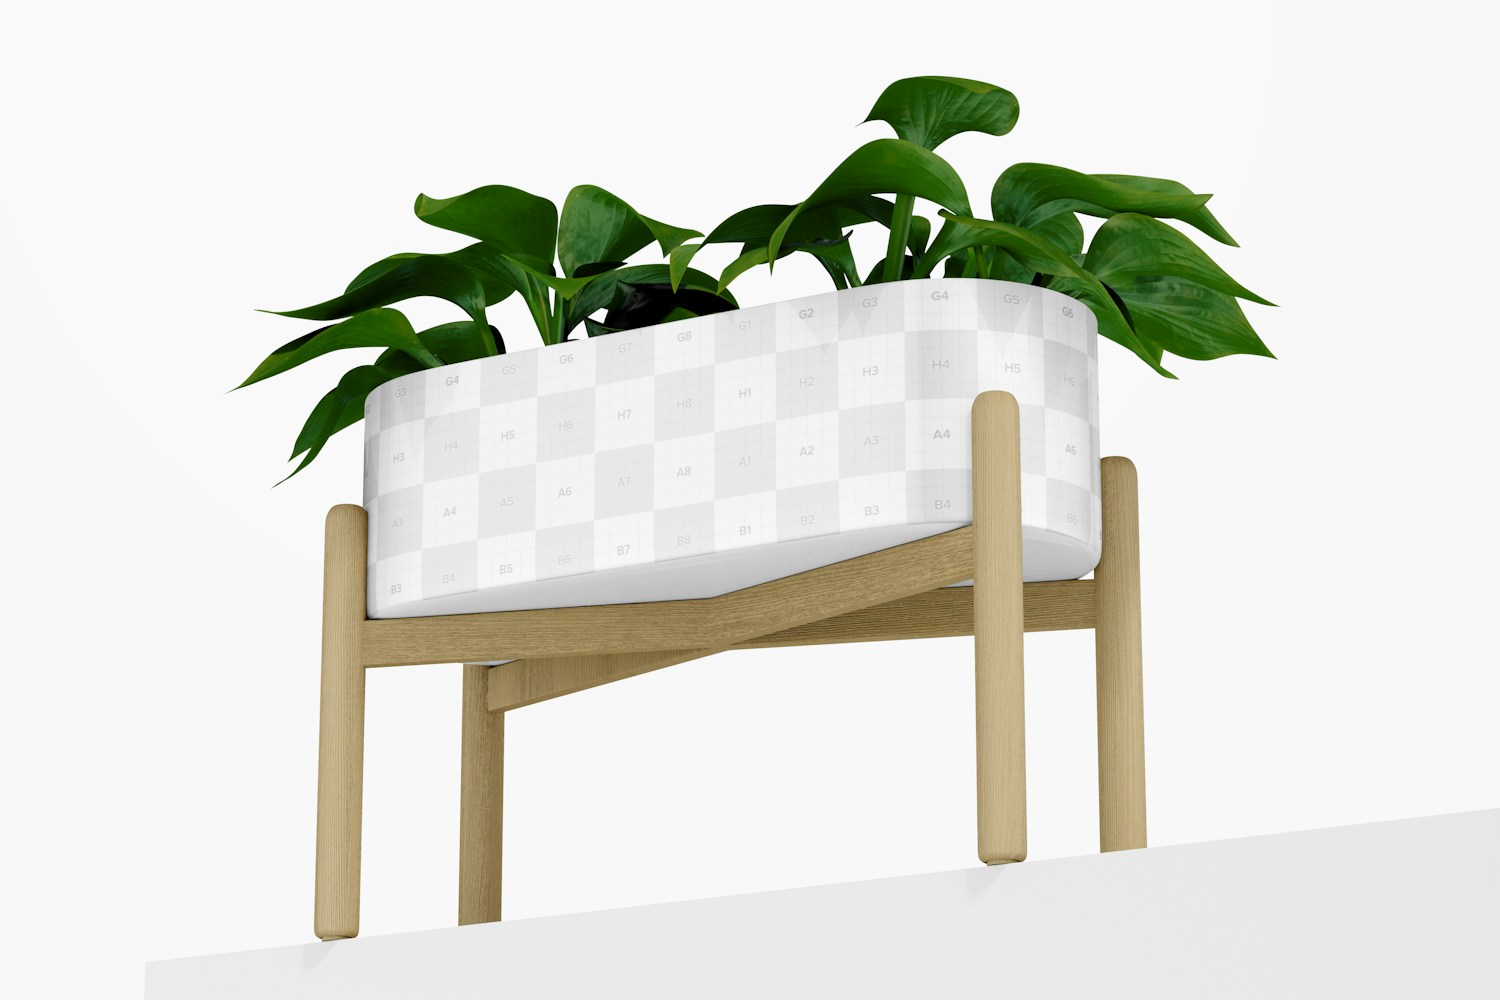 Ceramic Pot with Stand Mockup